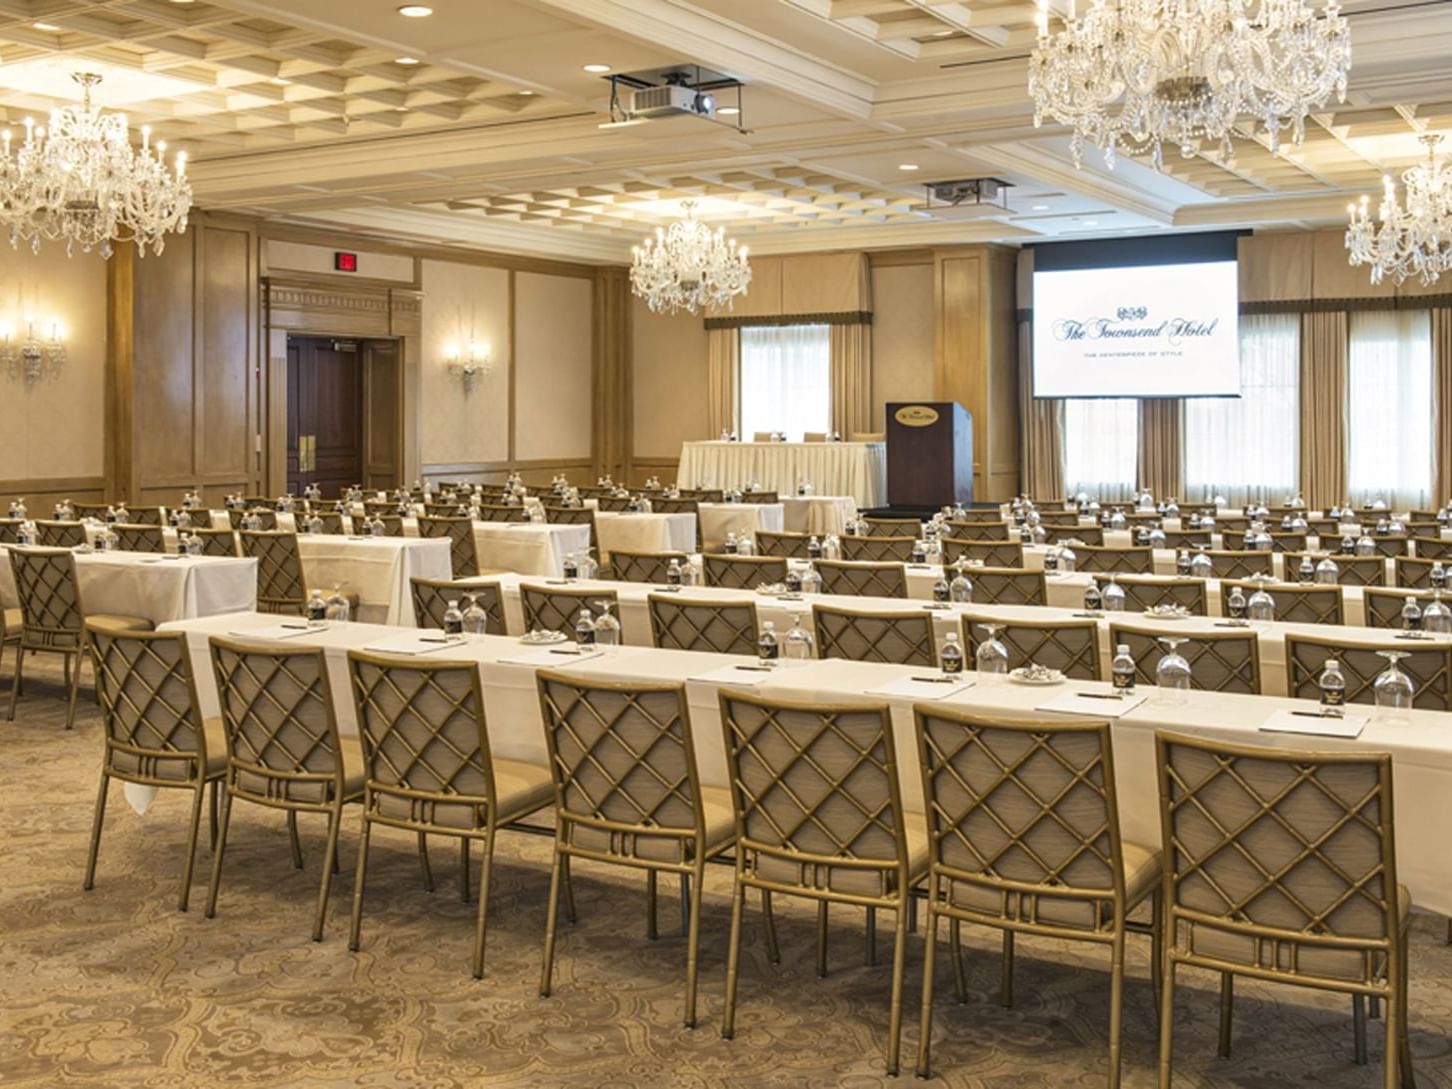 roms of tables and chairs in event room